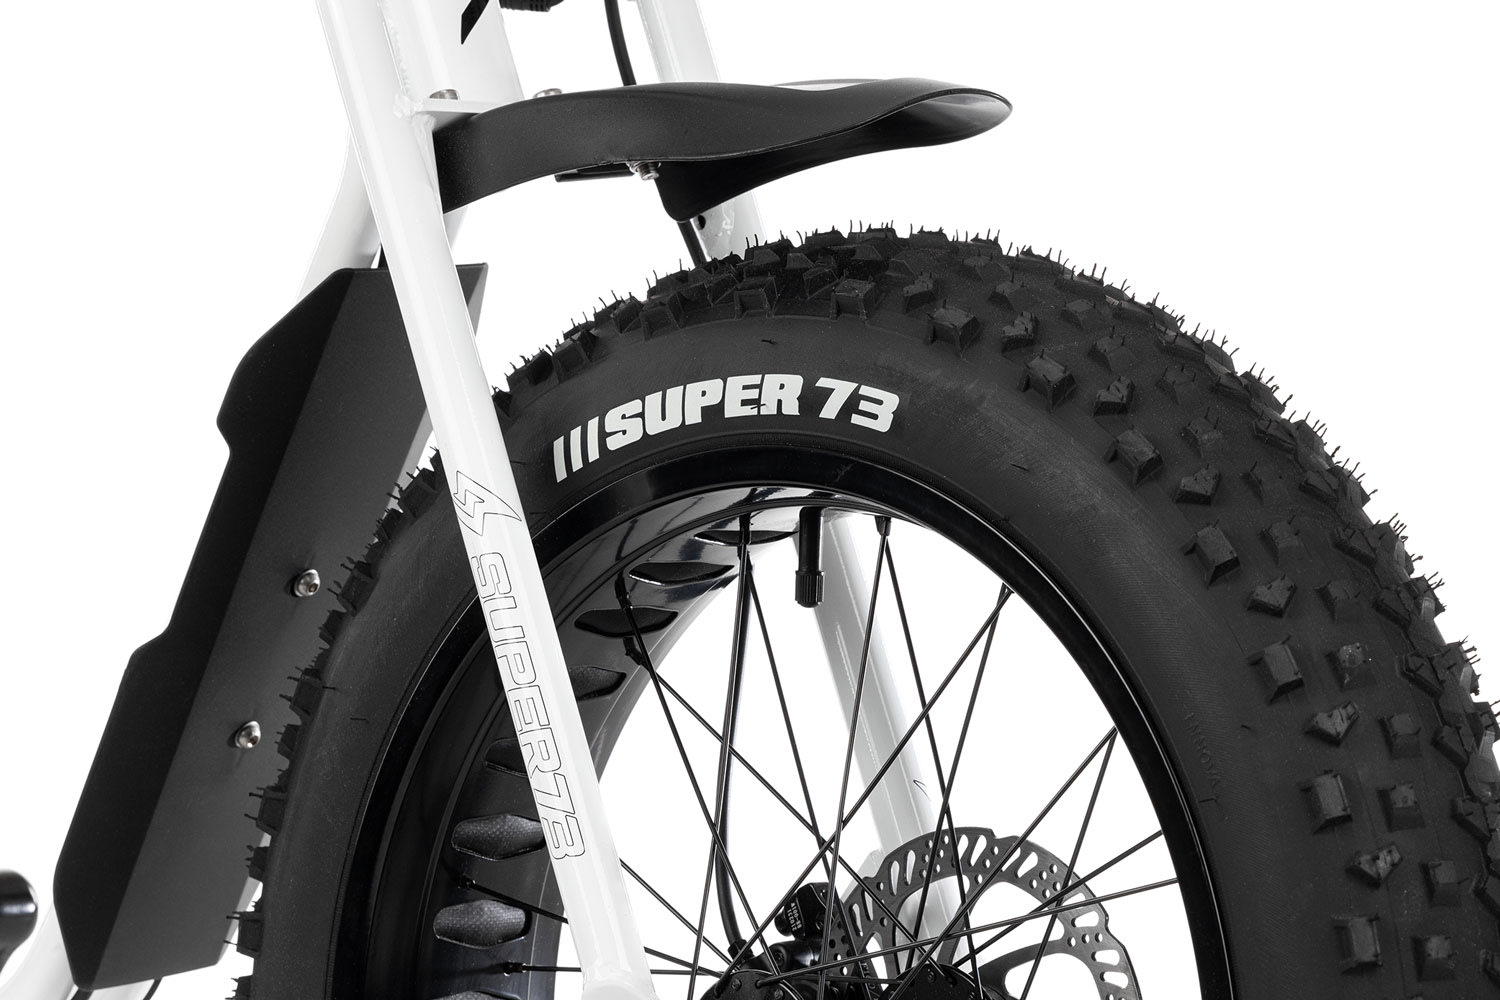 Closeup of the Super73-S1 in white front fender